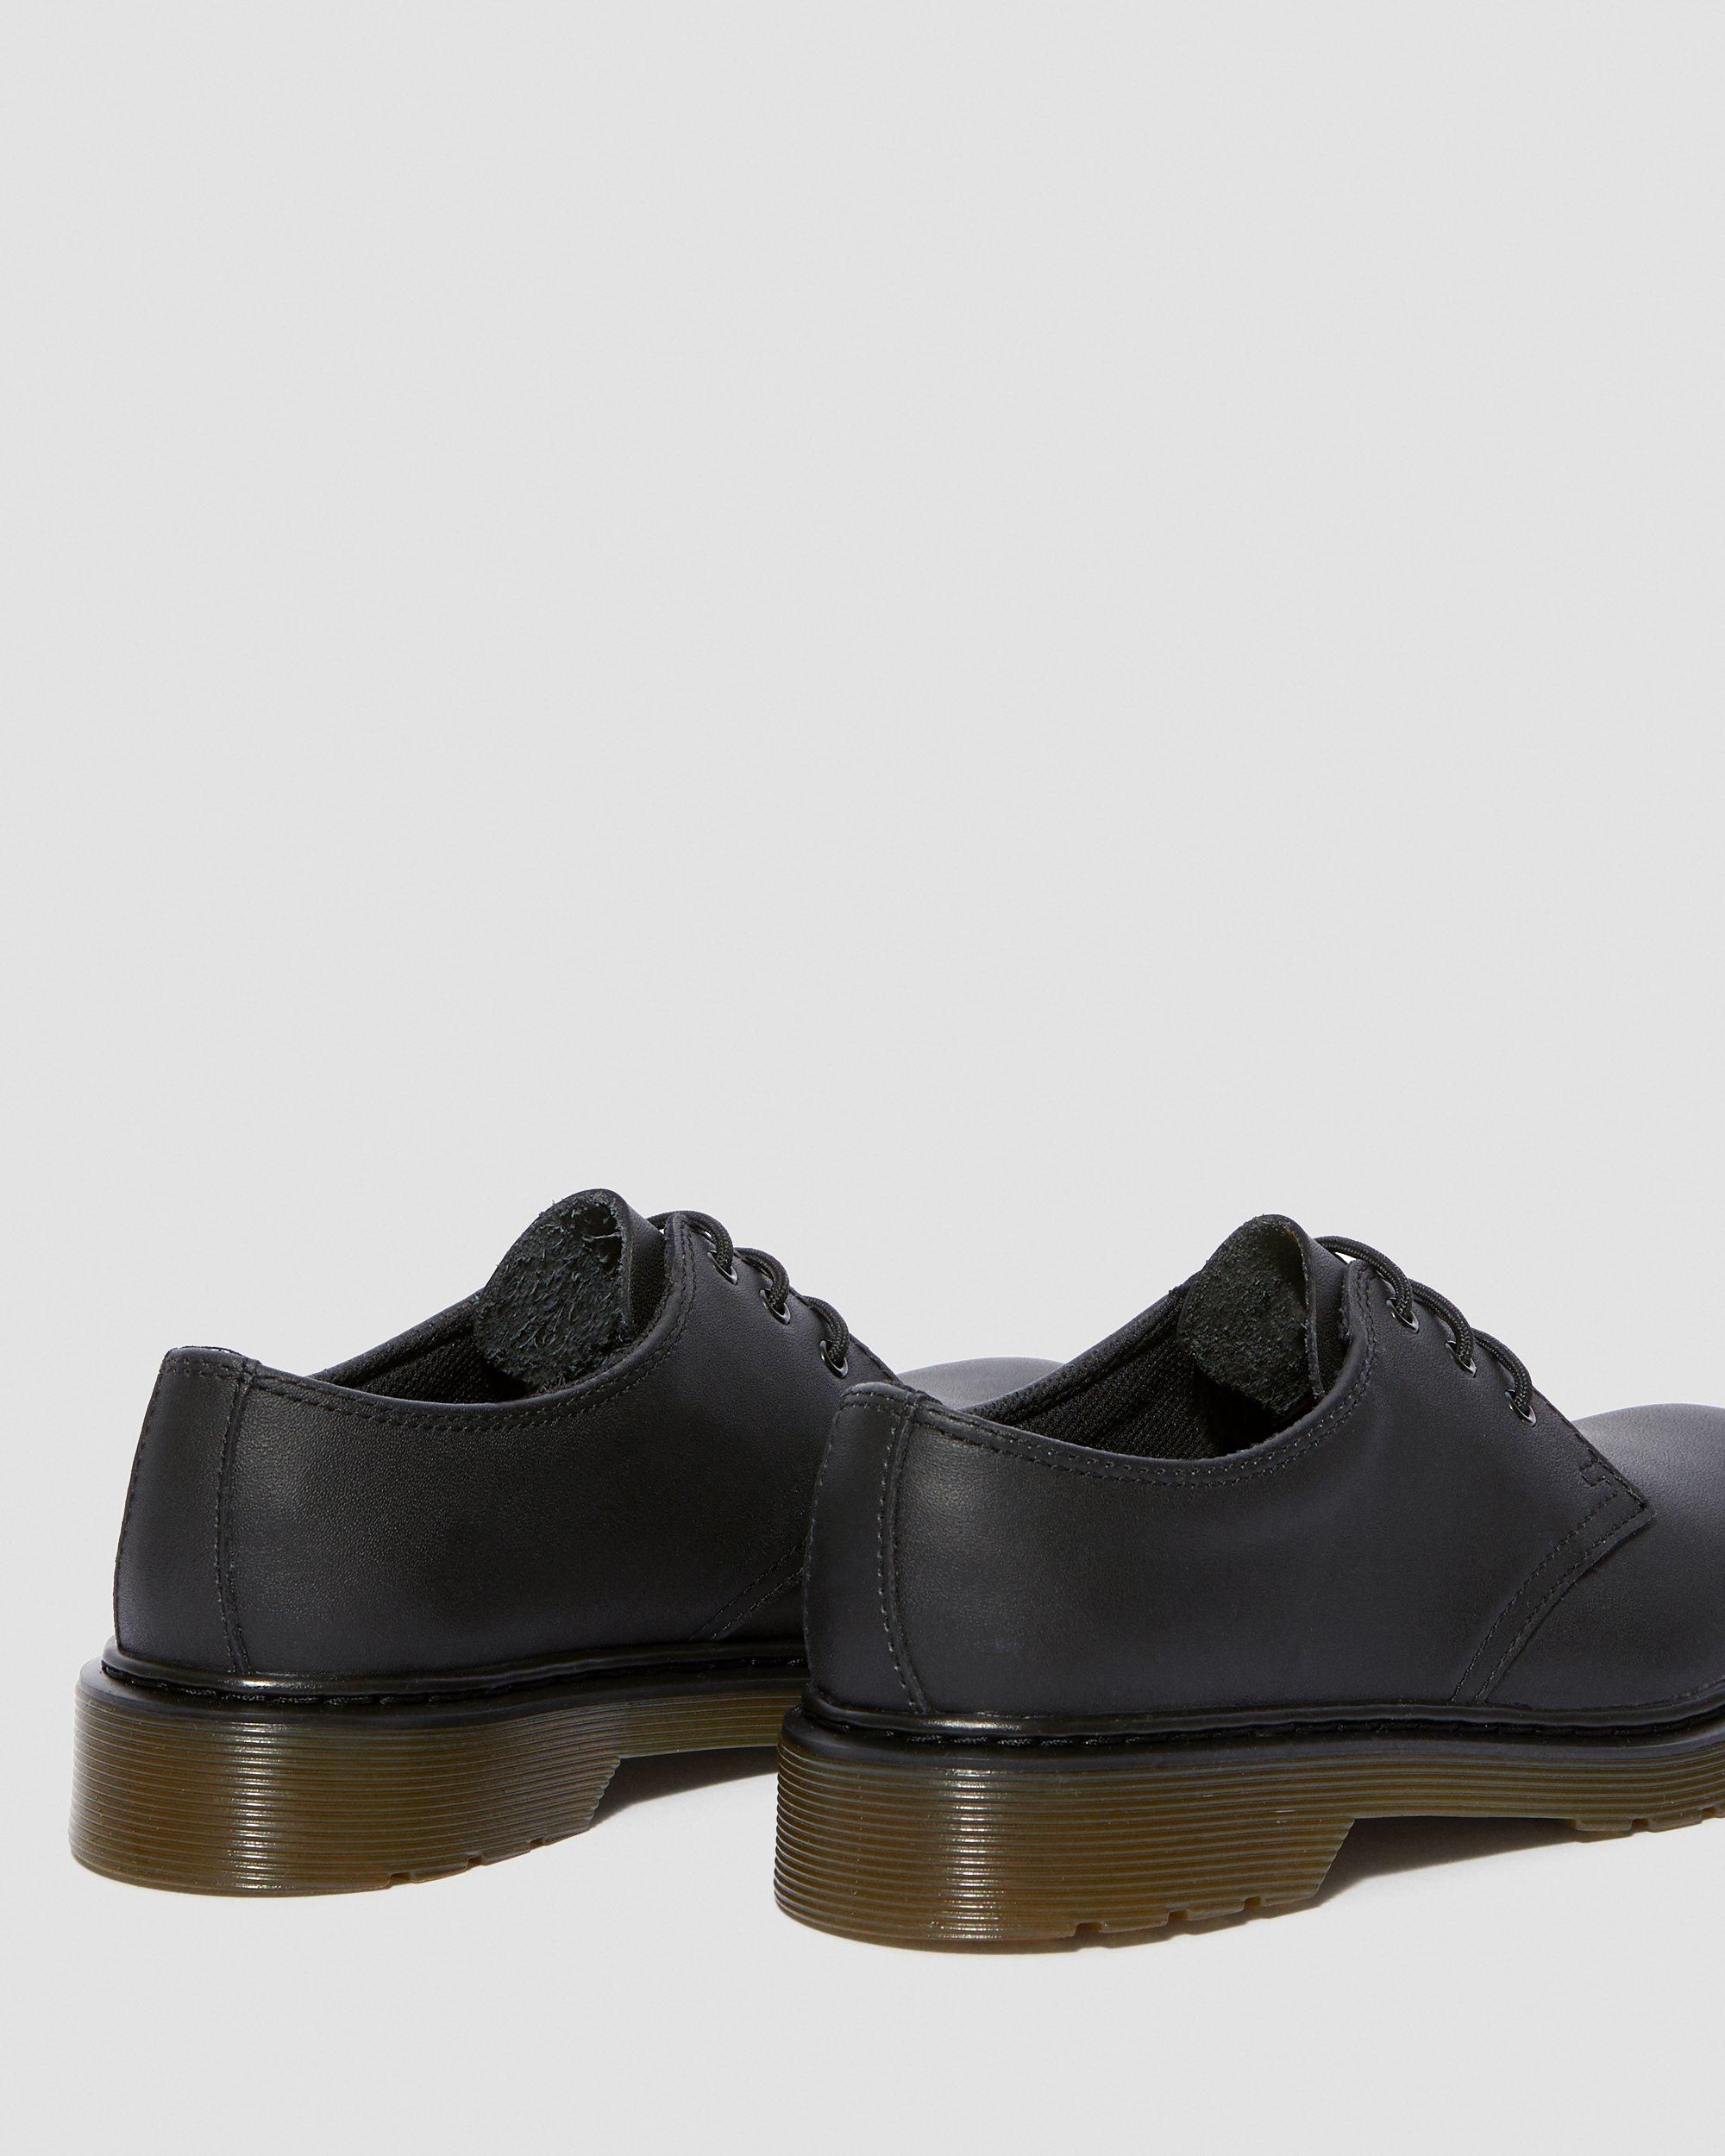 Youth 1461 Leather Oxford Shoes in Black